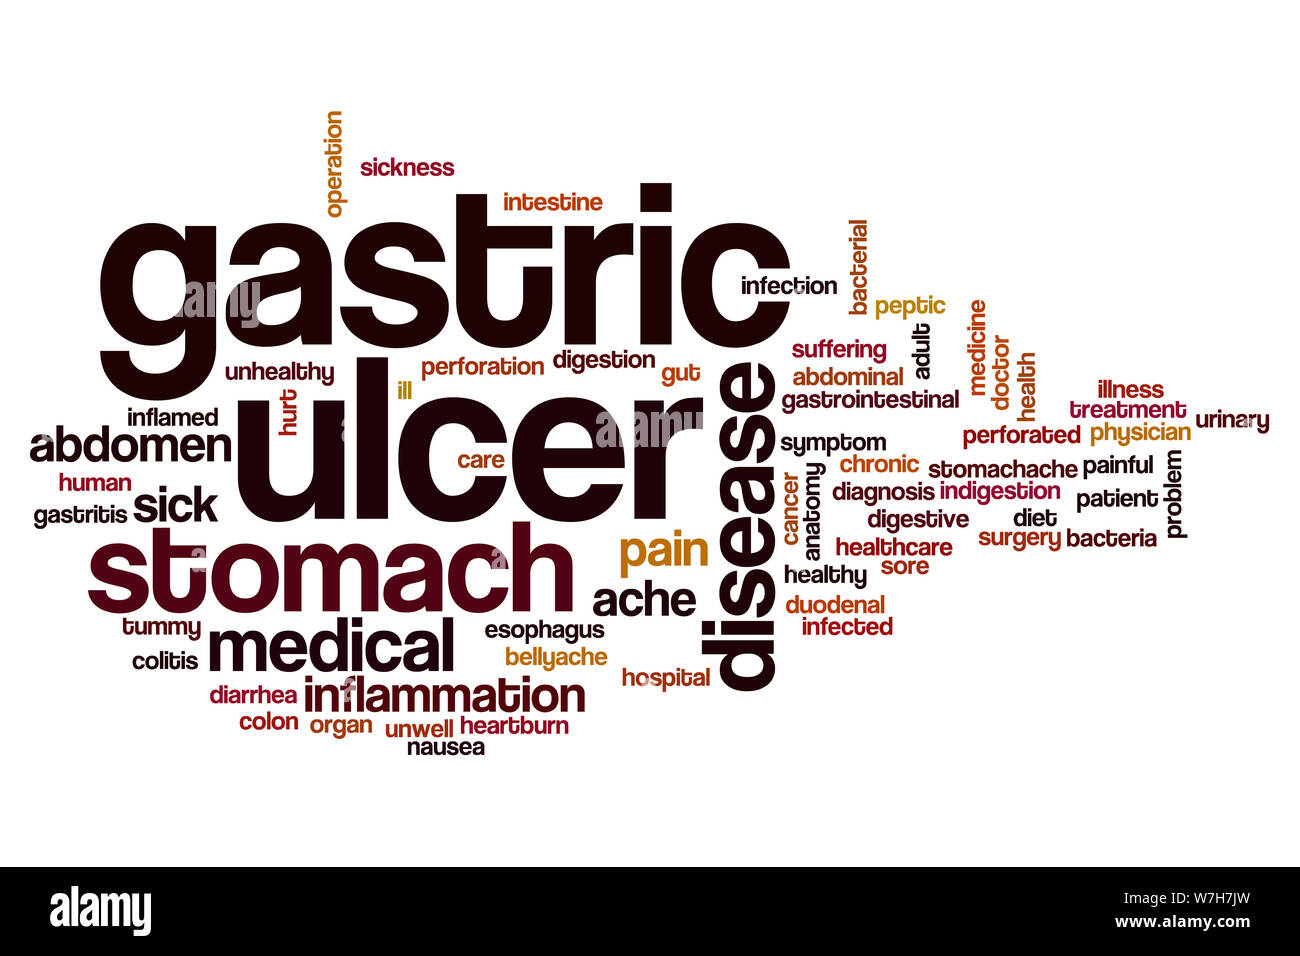 Gastric ulcer word cloud concept Stock Photo